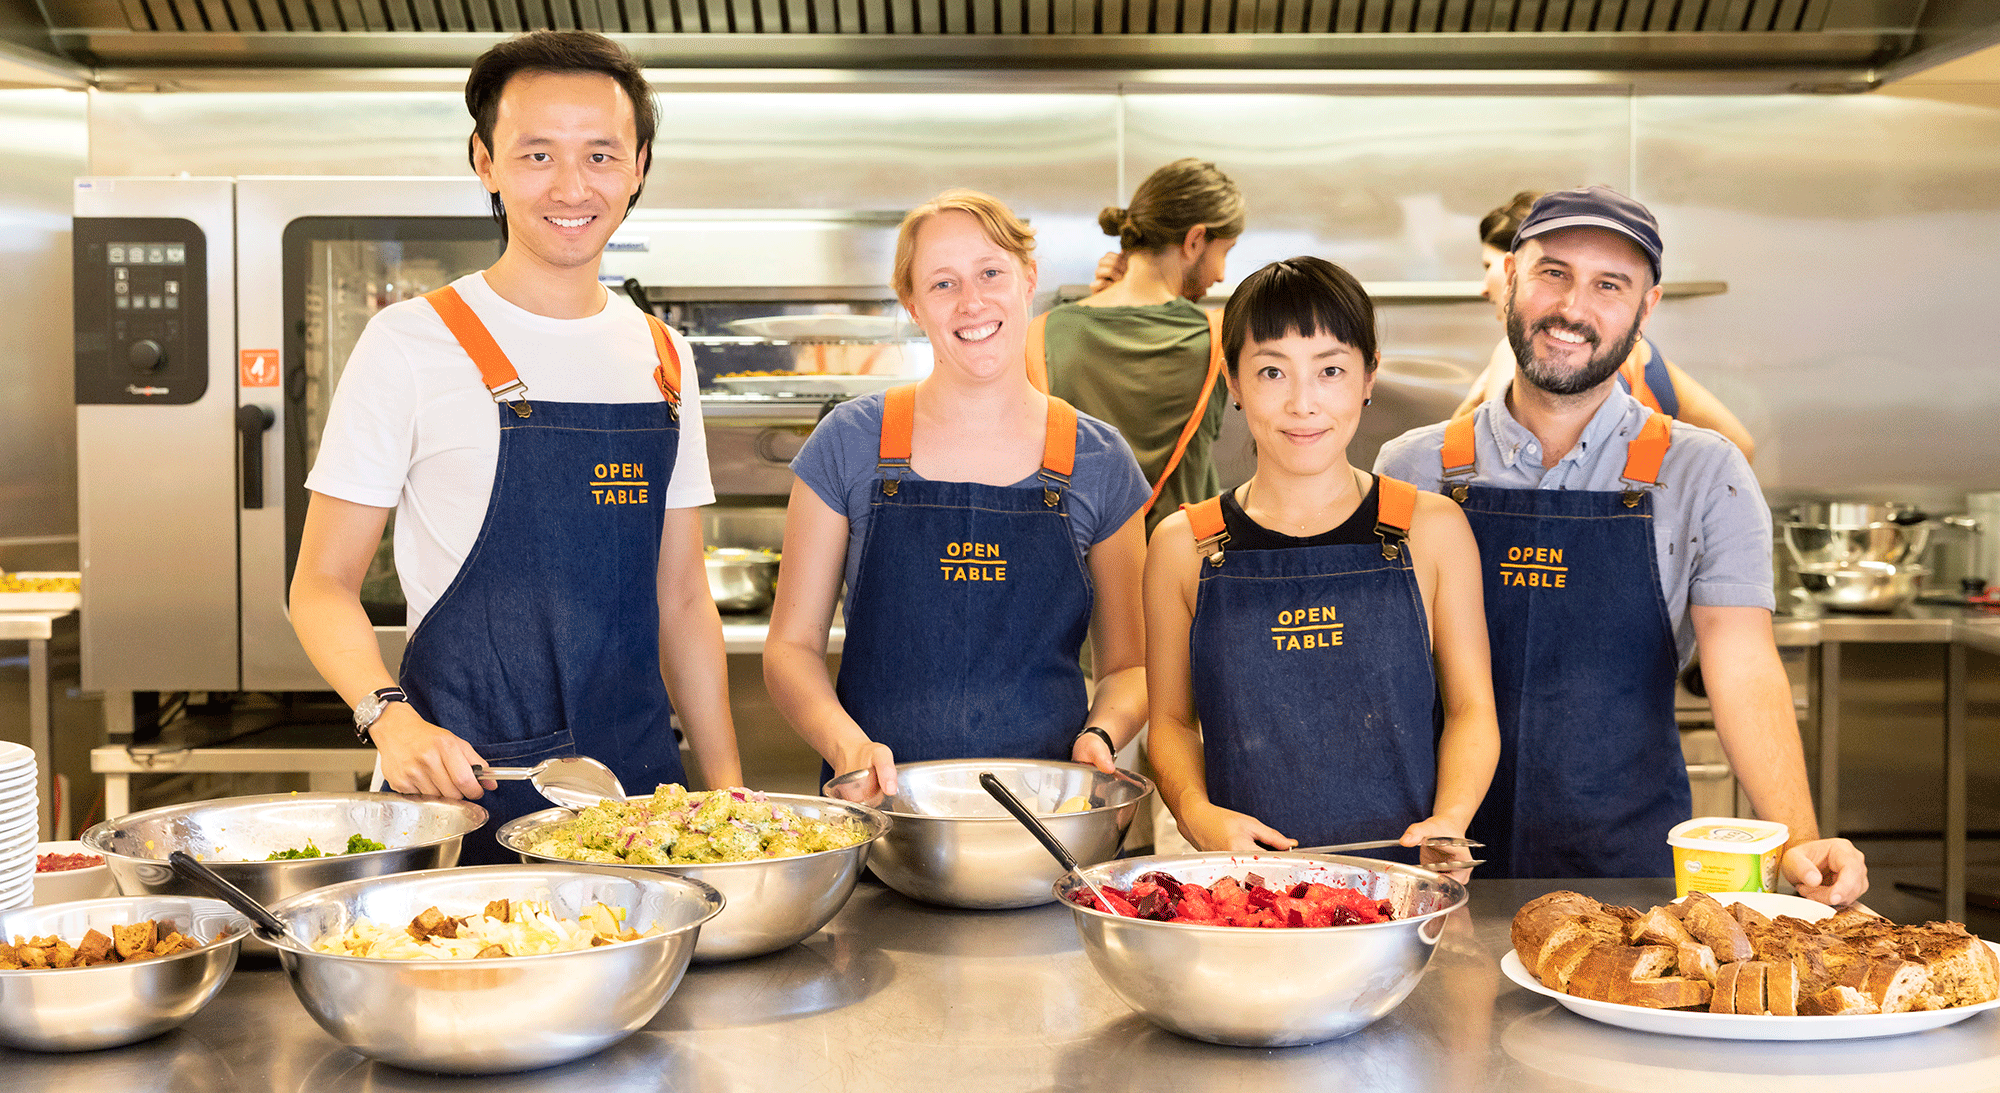 Four people wearing navy aprons that say Open Table on them standing together in a commercial kitchen